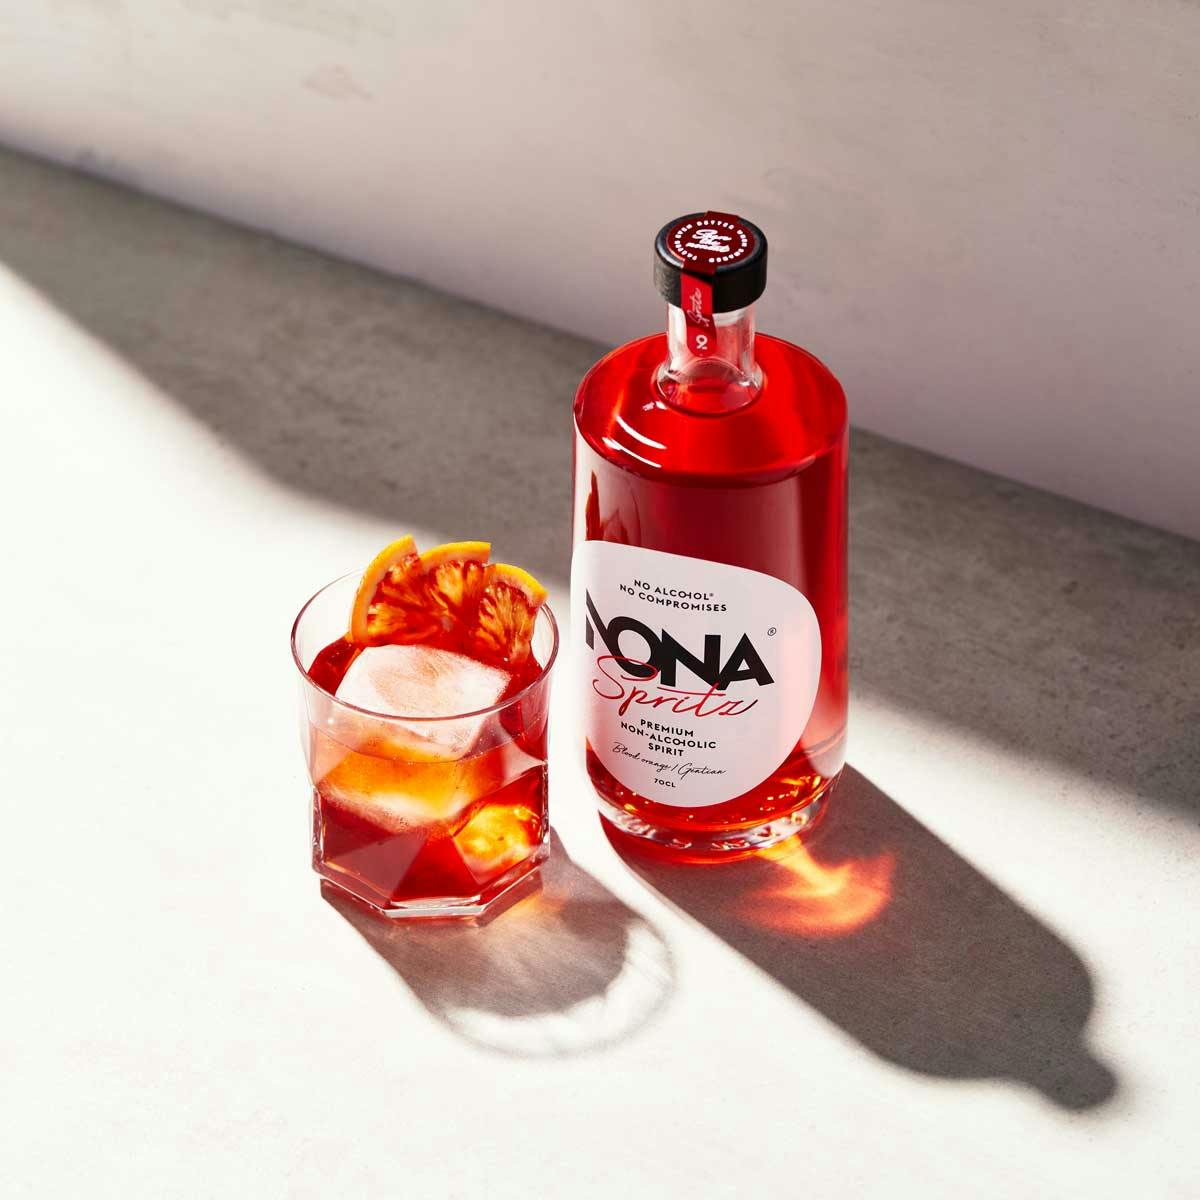 Bottle of non-alcoholic spritz by Nona and glass with non-alcoholic spritz